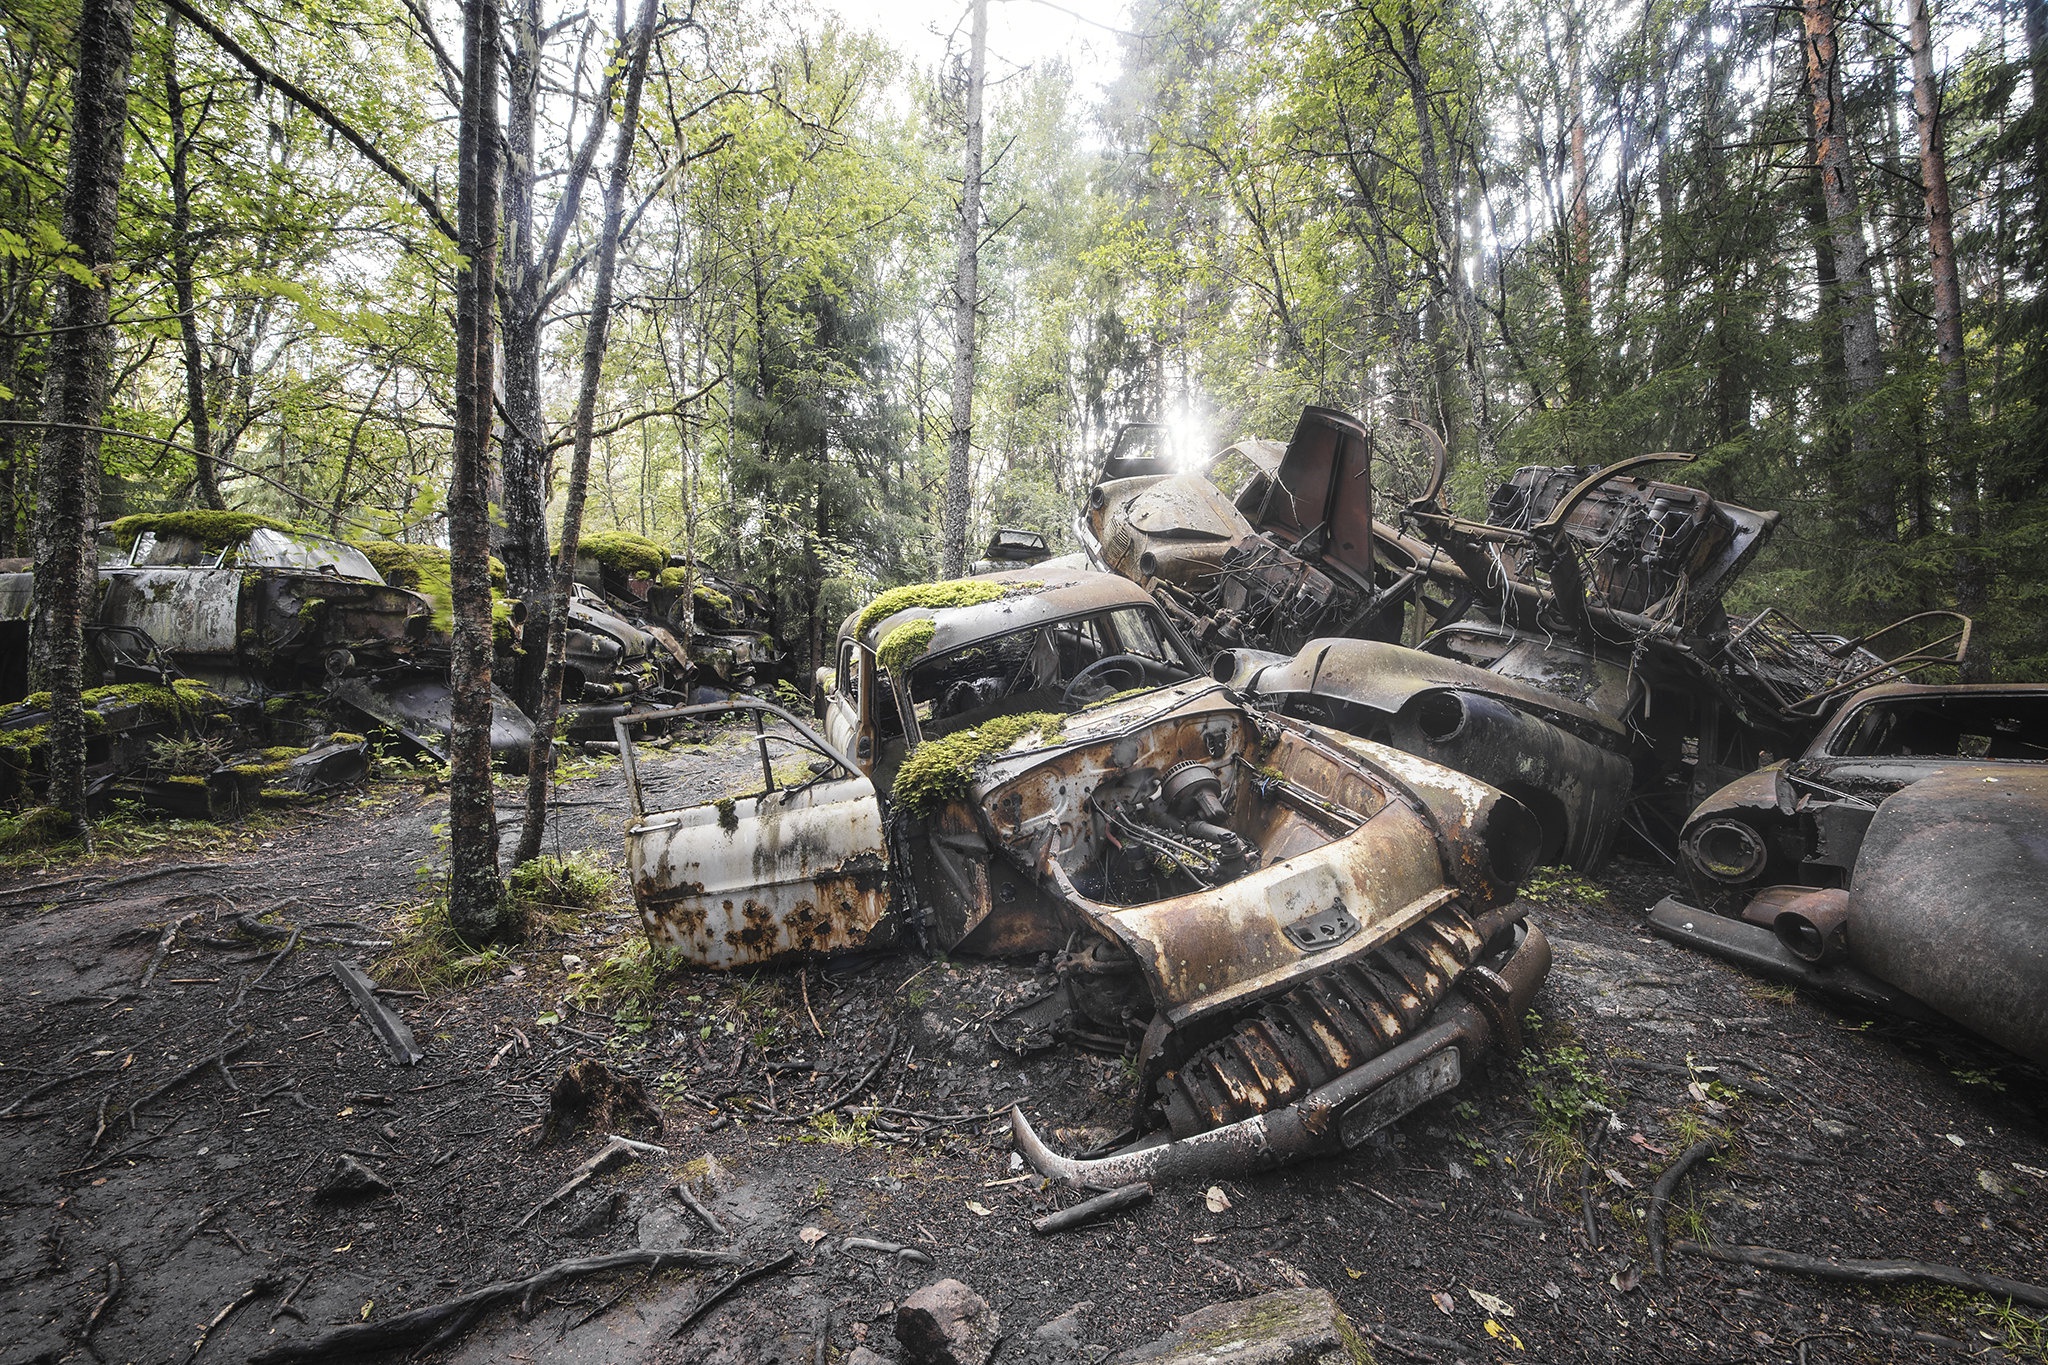 General 2048x1365 car vehicle trees wreck